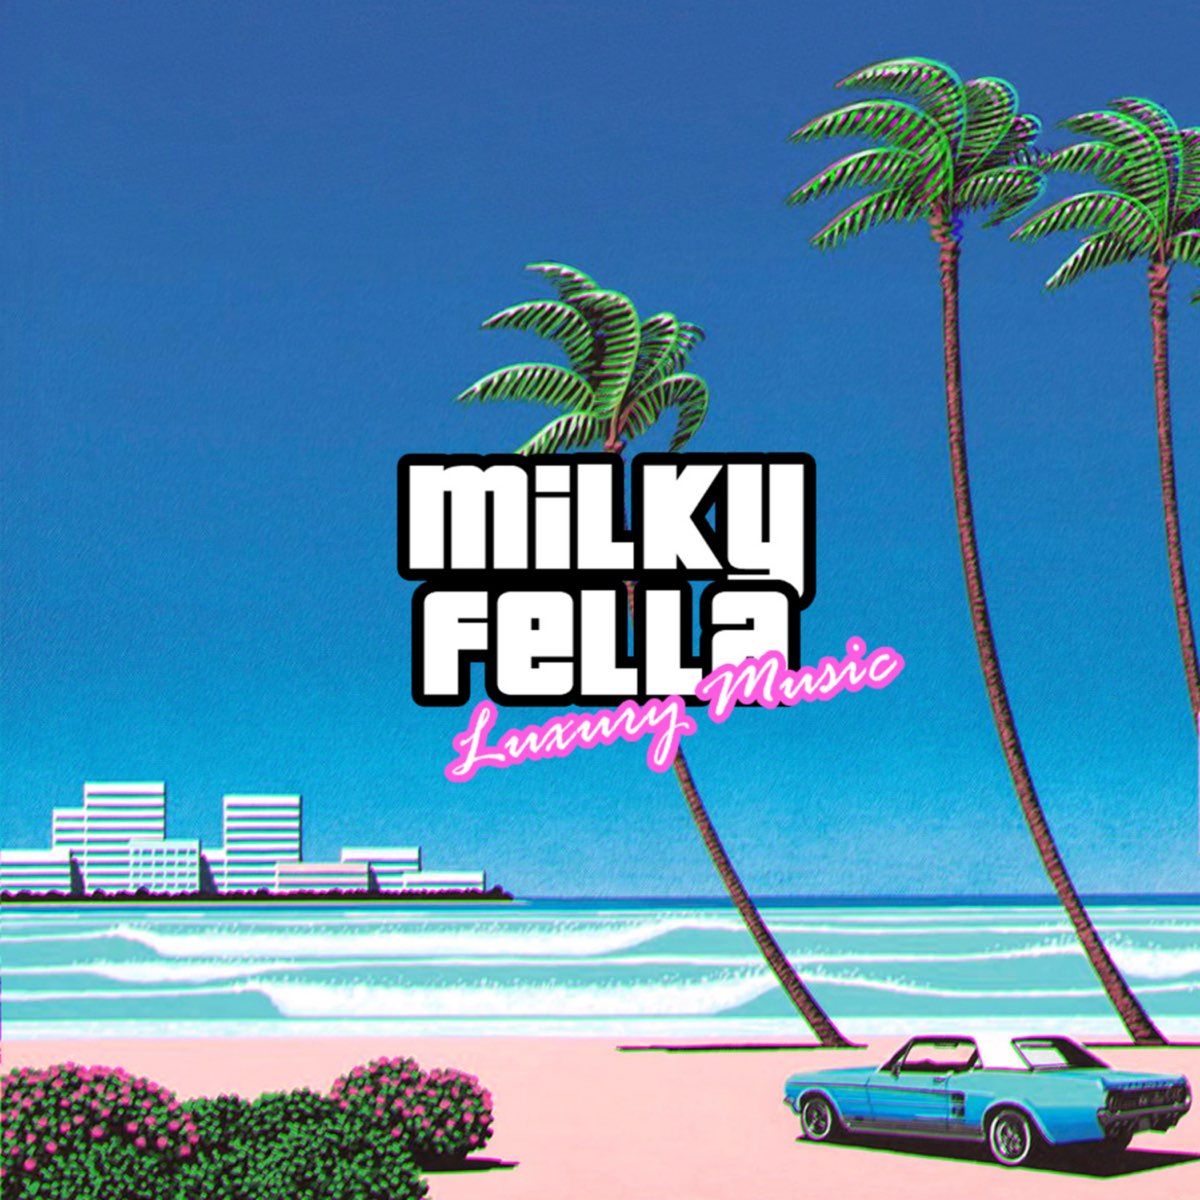 A beach scene with palm trees and a car, with the Milky Fella logo in the middle. - Windows 95